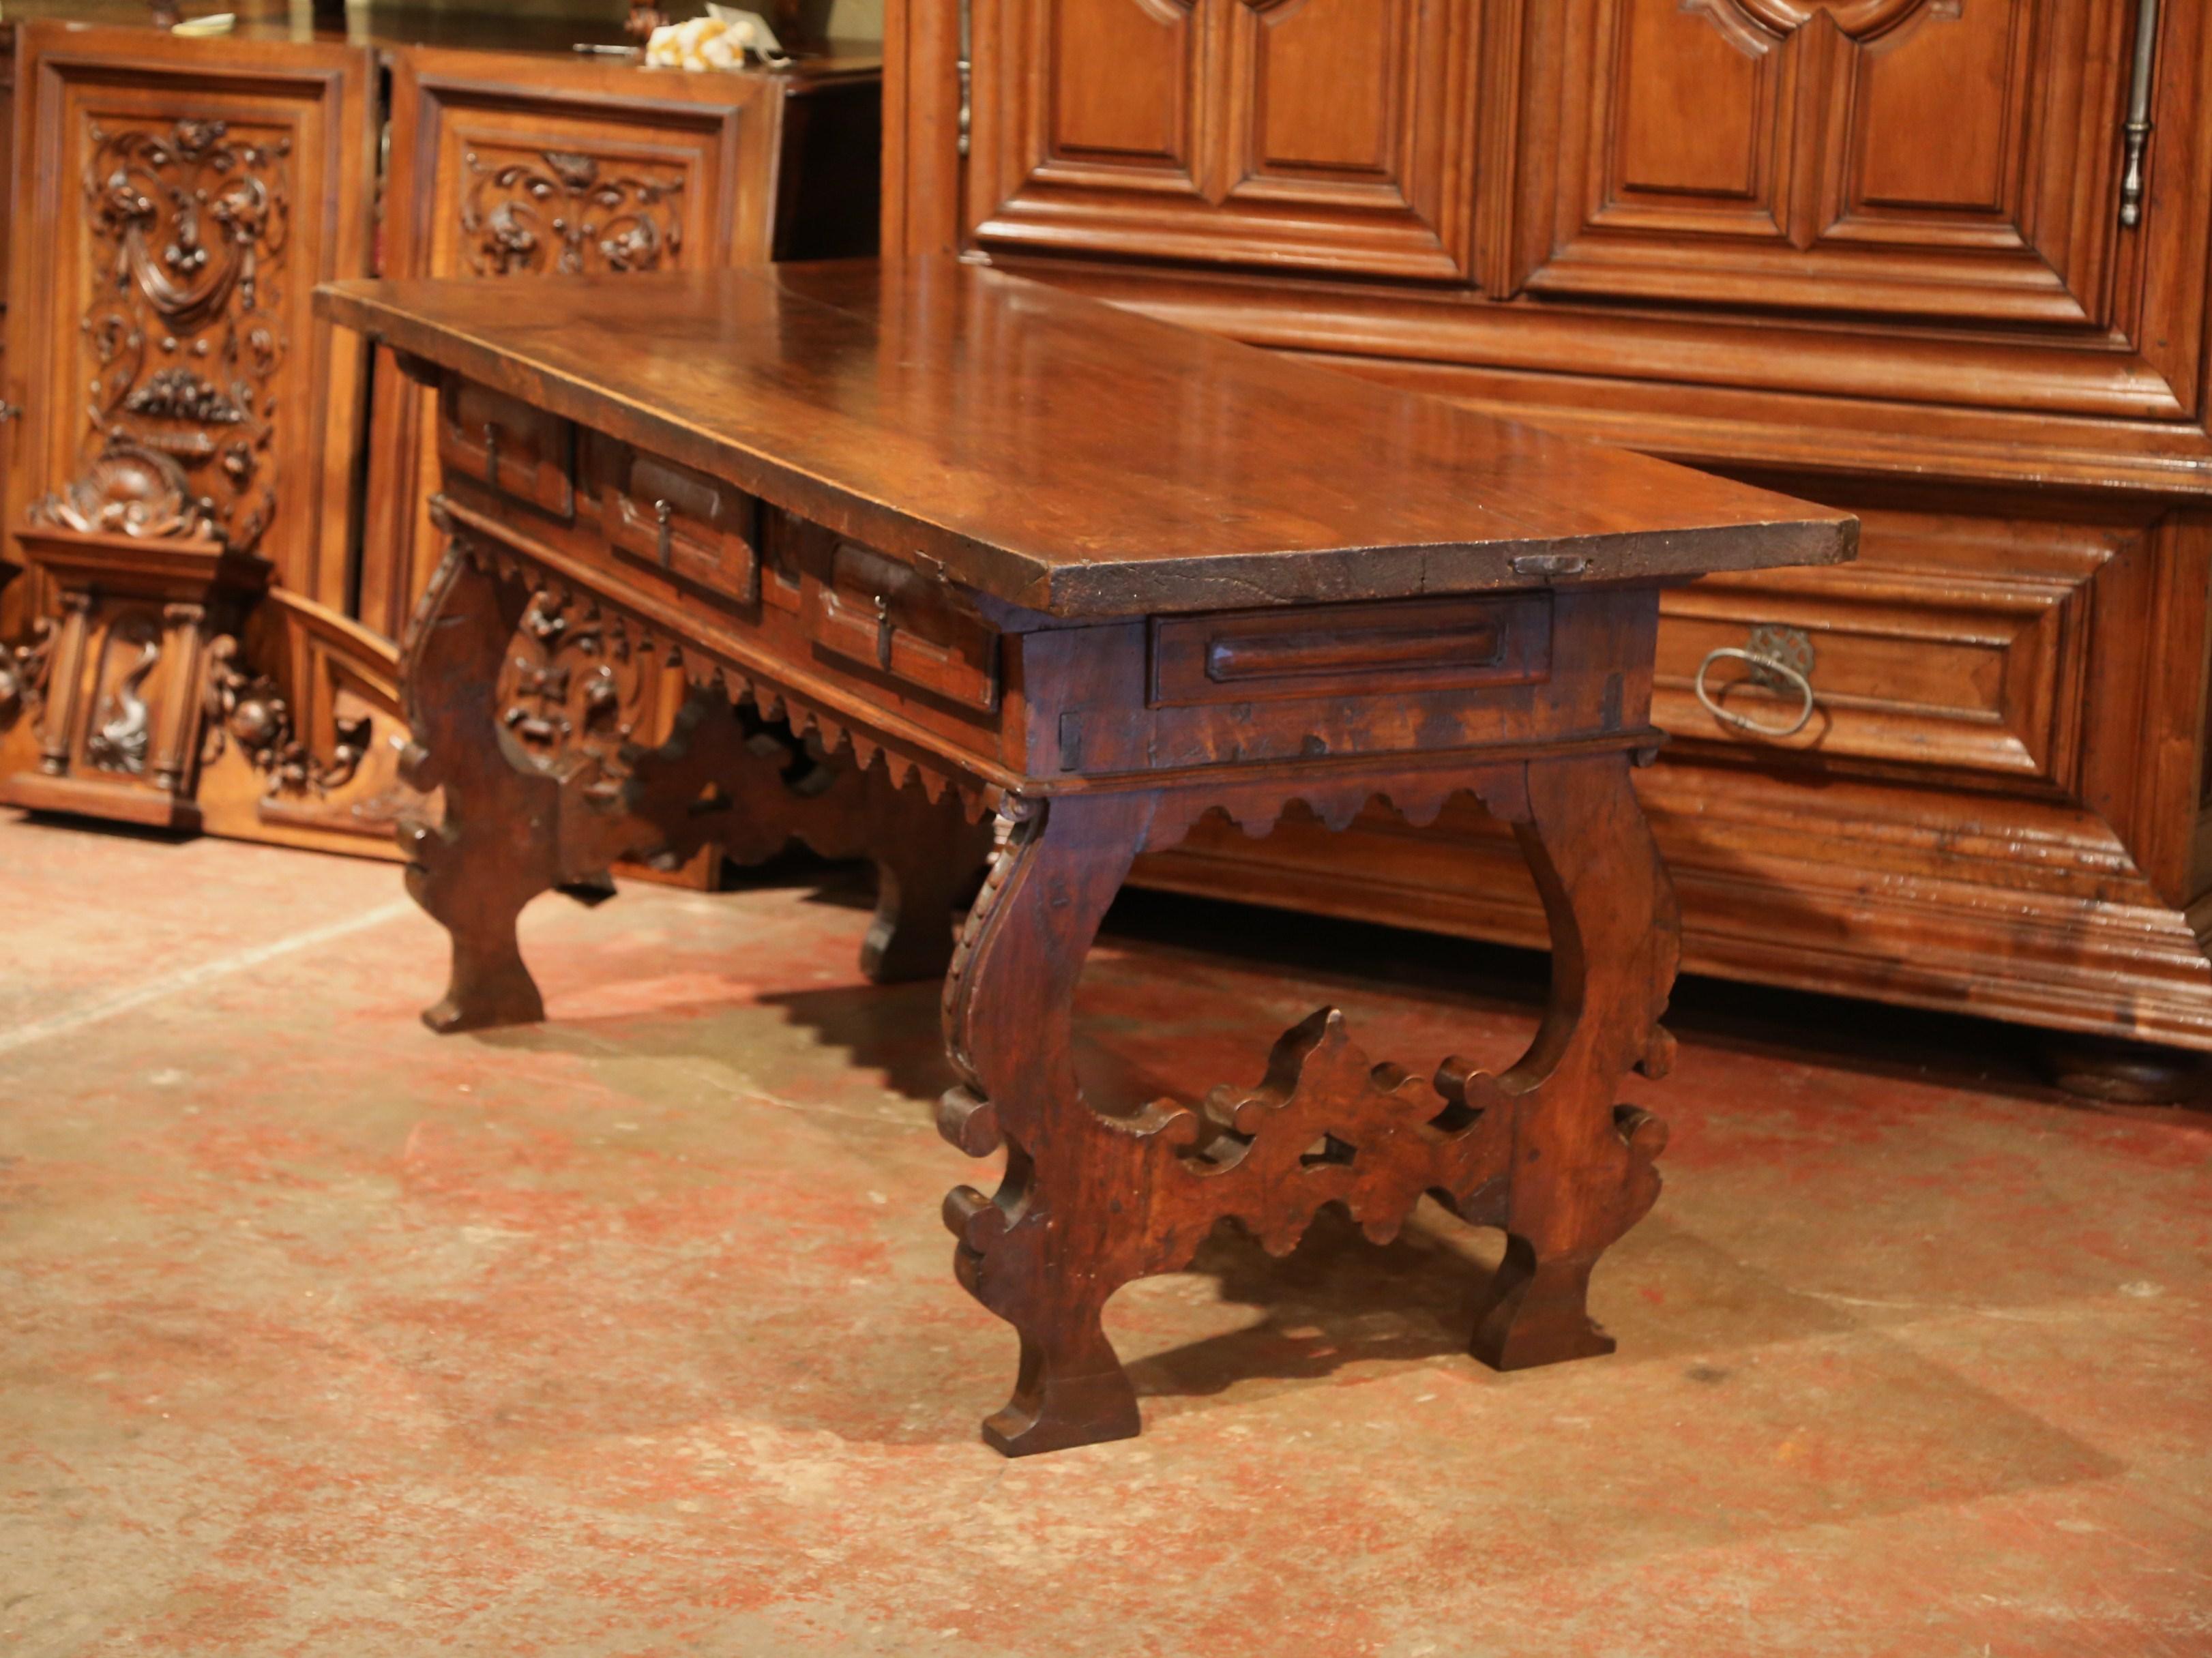 Hand-Carved 18th Century Spanish Carved Walnut Console Table with Secret Drawers